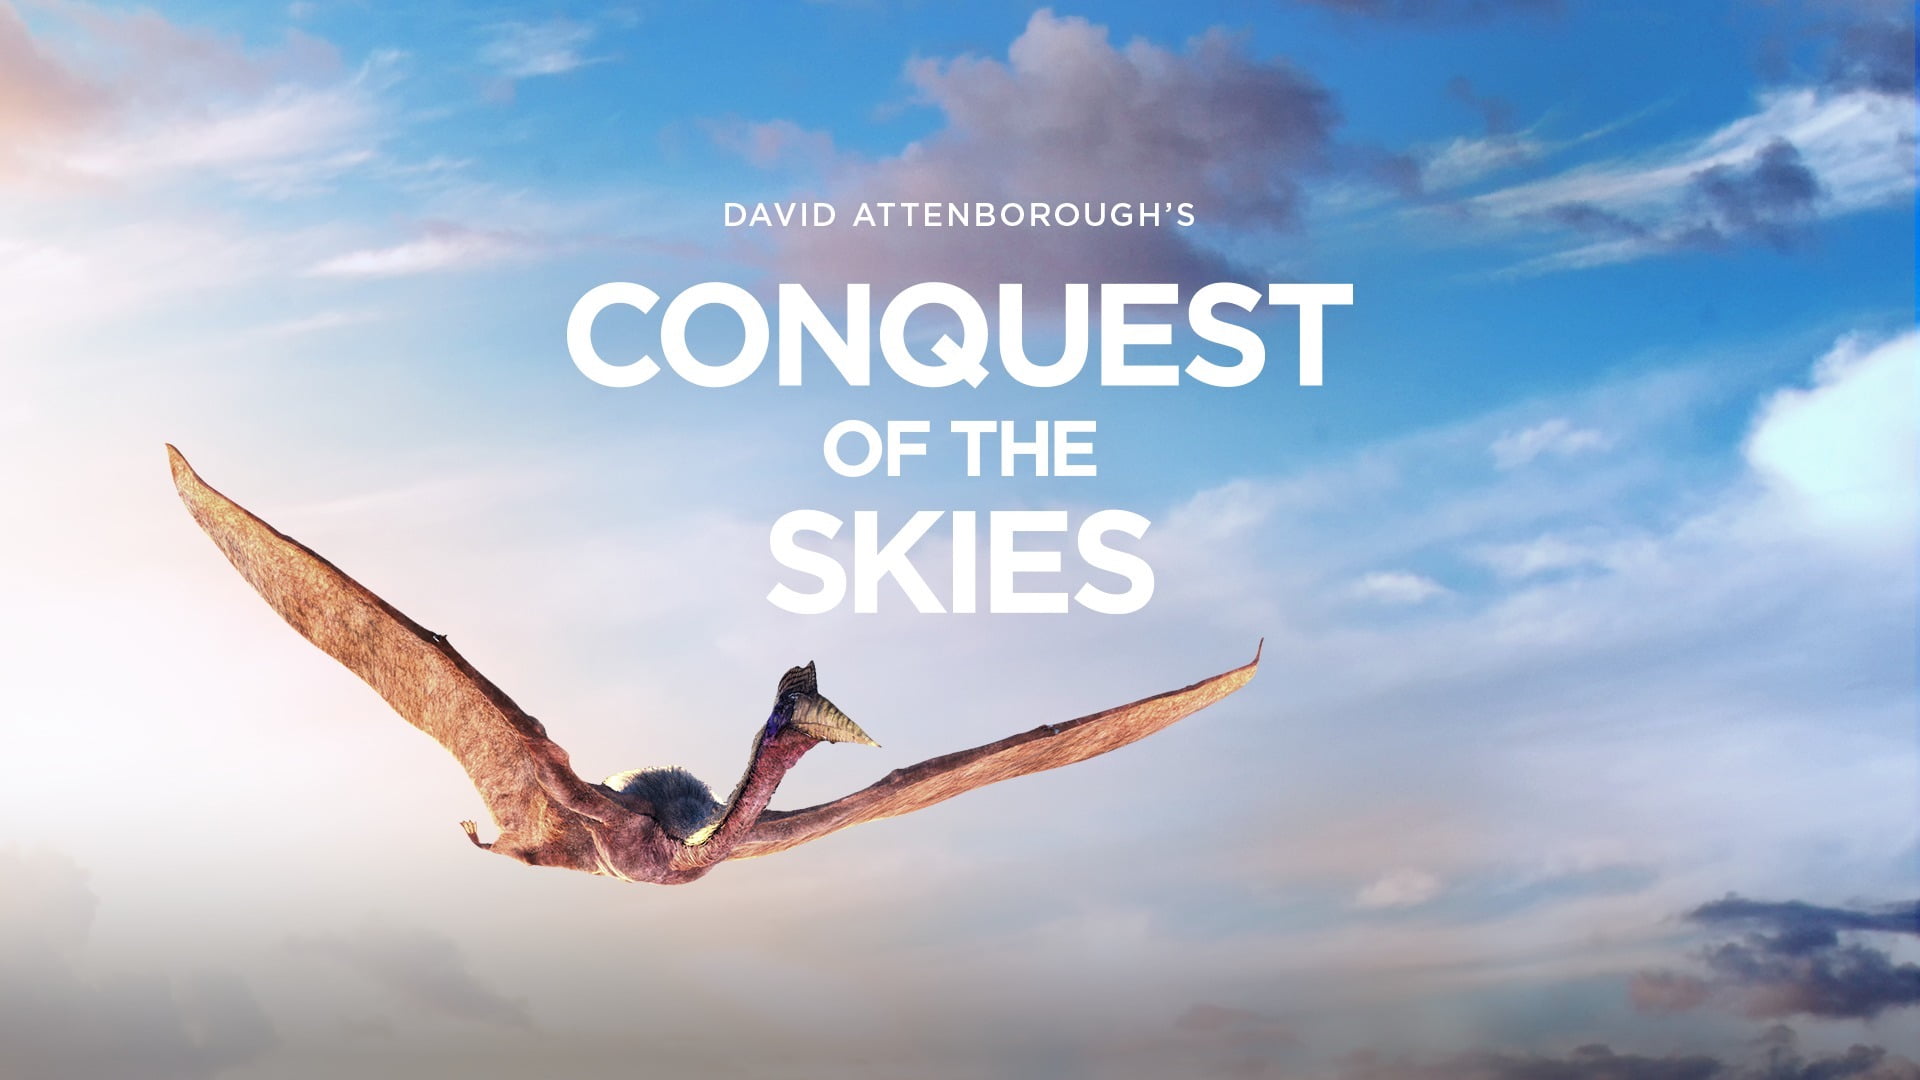 David Attenborough’s latest 8K 3D VR doc for Quest 2 is stunningly beautiful